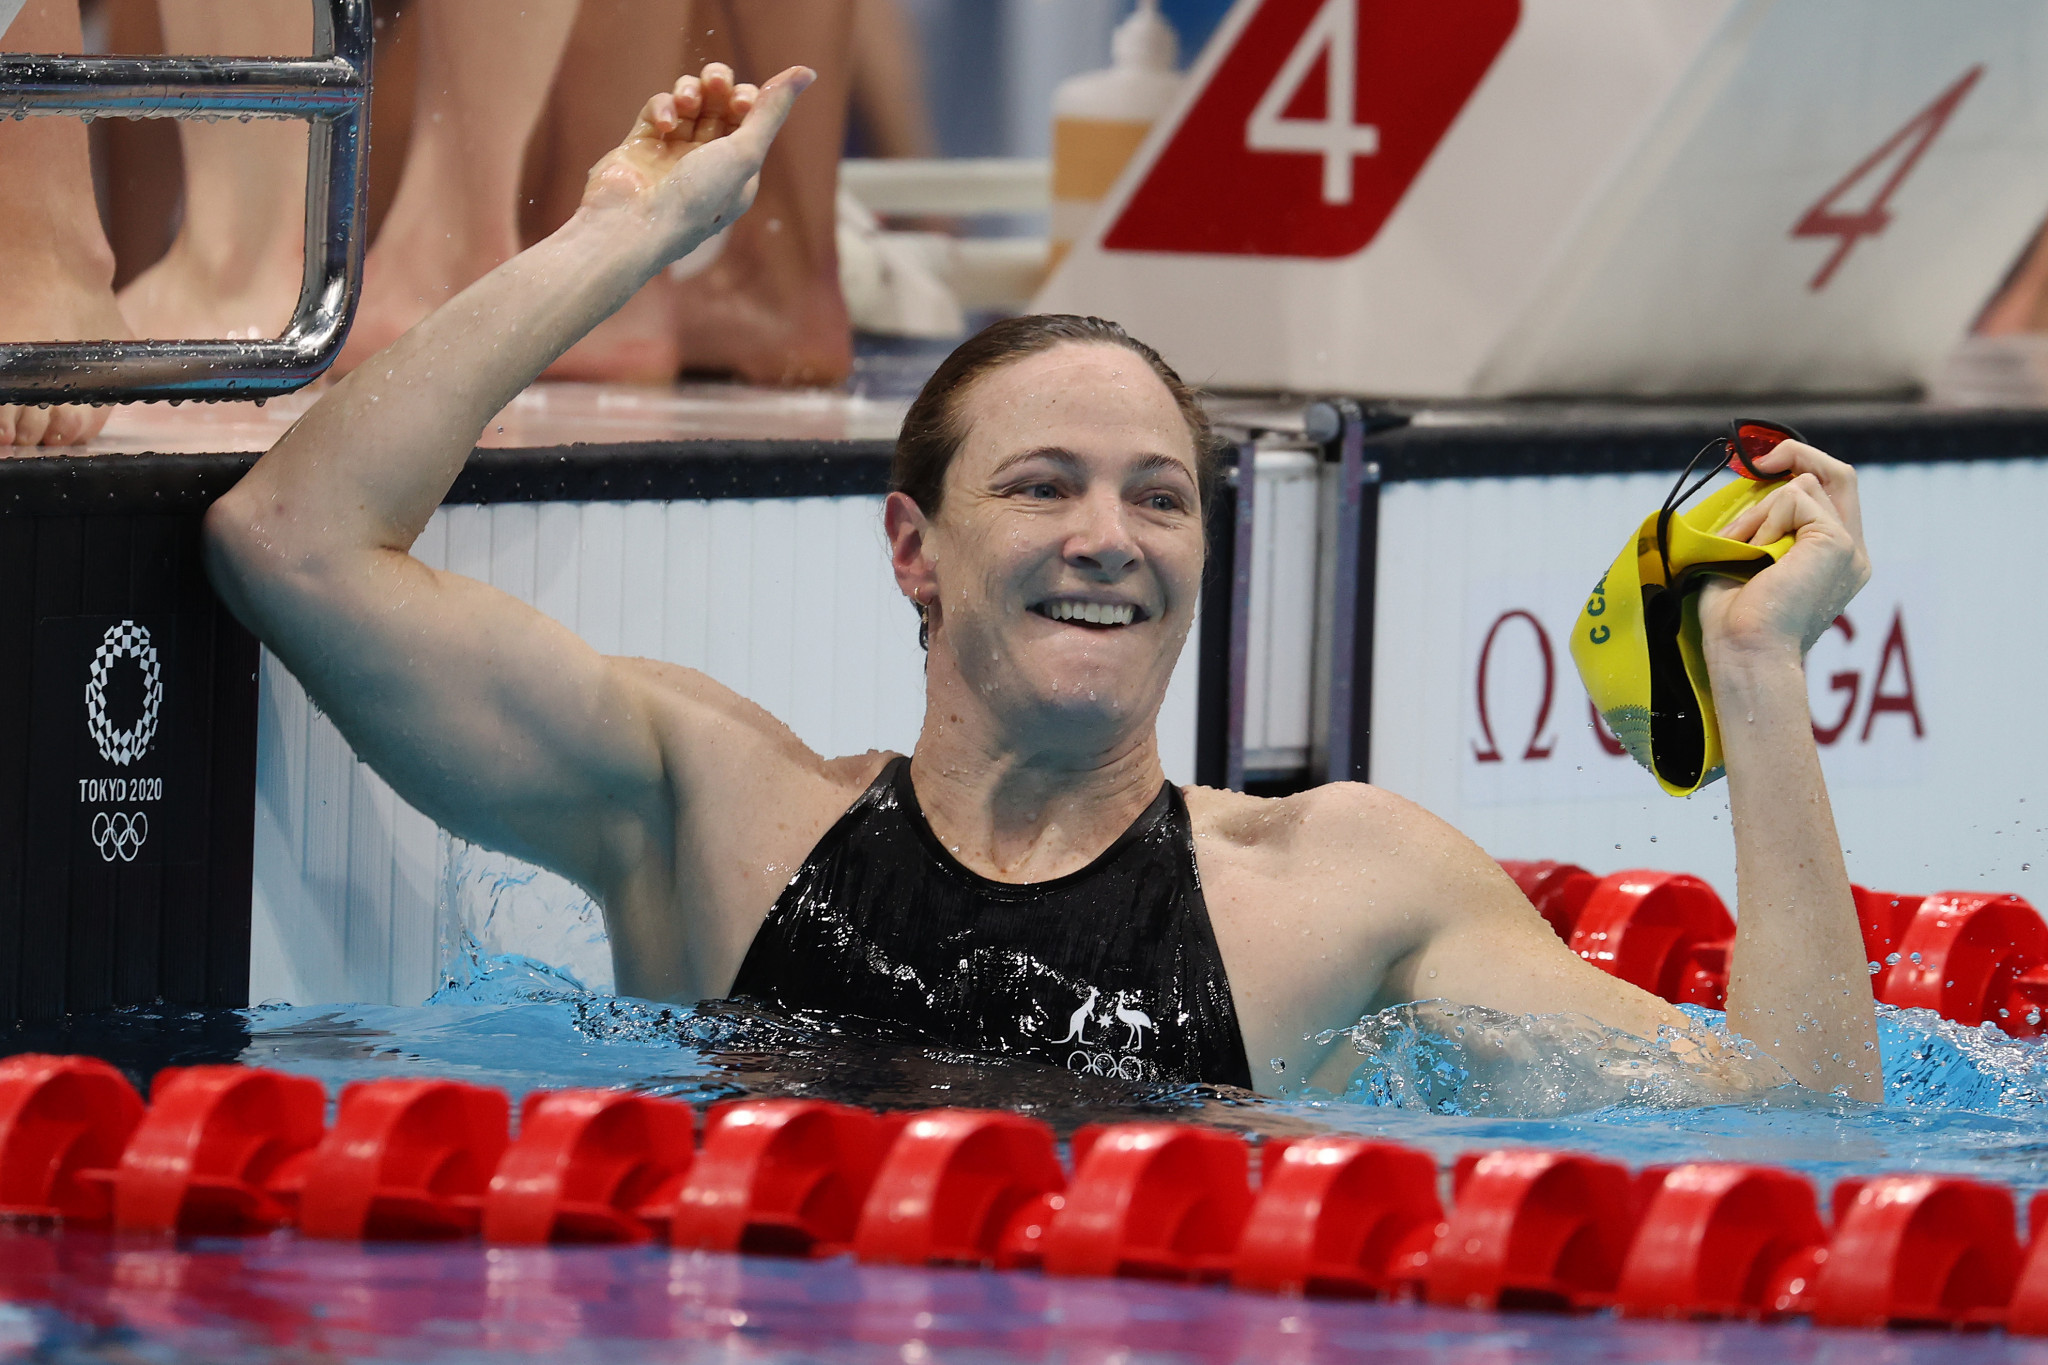 Six-time Commonwealth Games swimming gold medallist Cate Campbell has announced she will not compete at Birmingham 2022 ©Getty Images